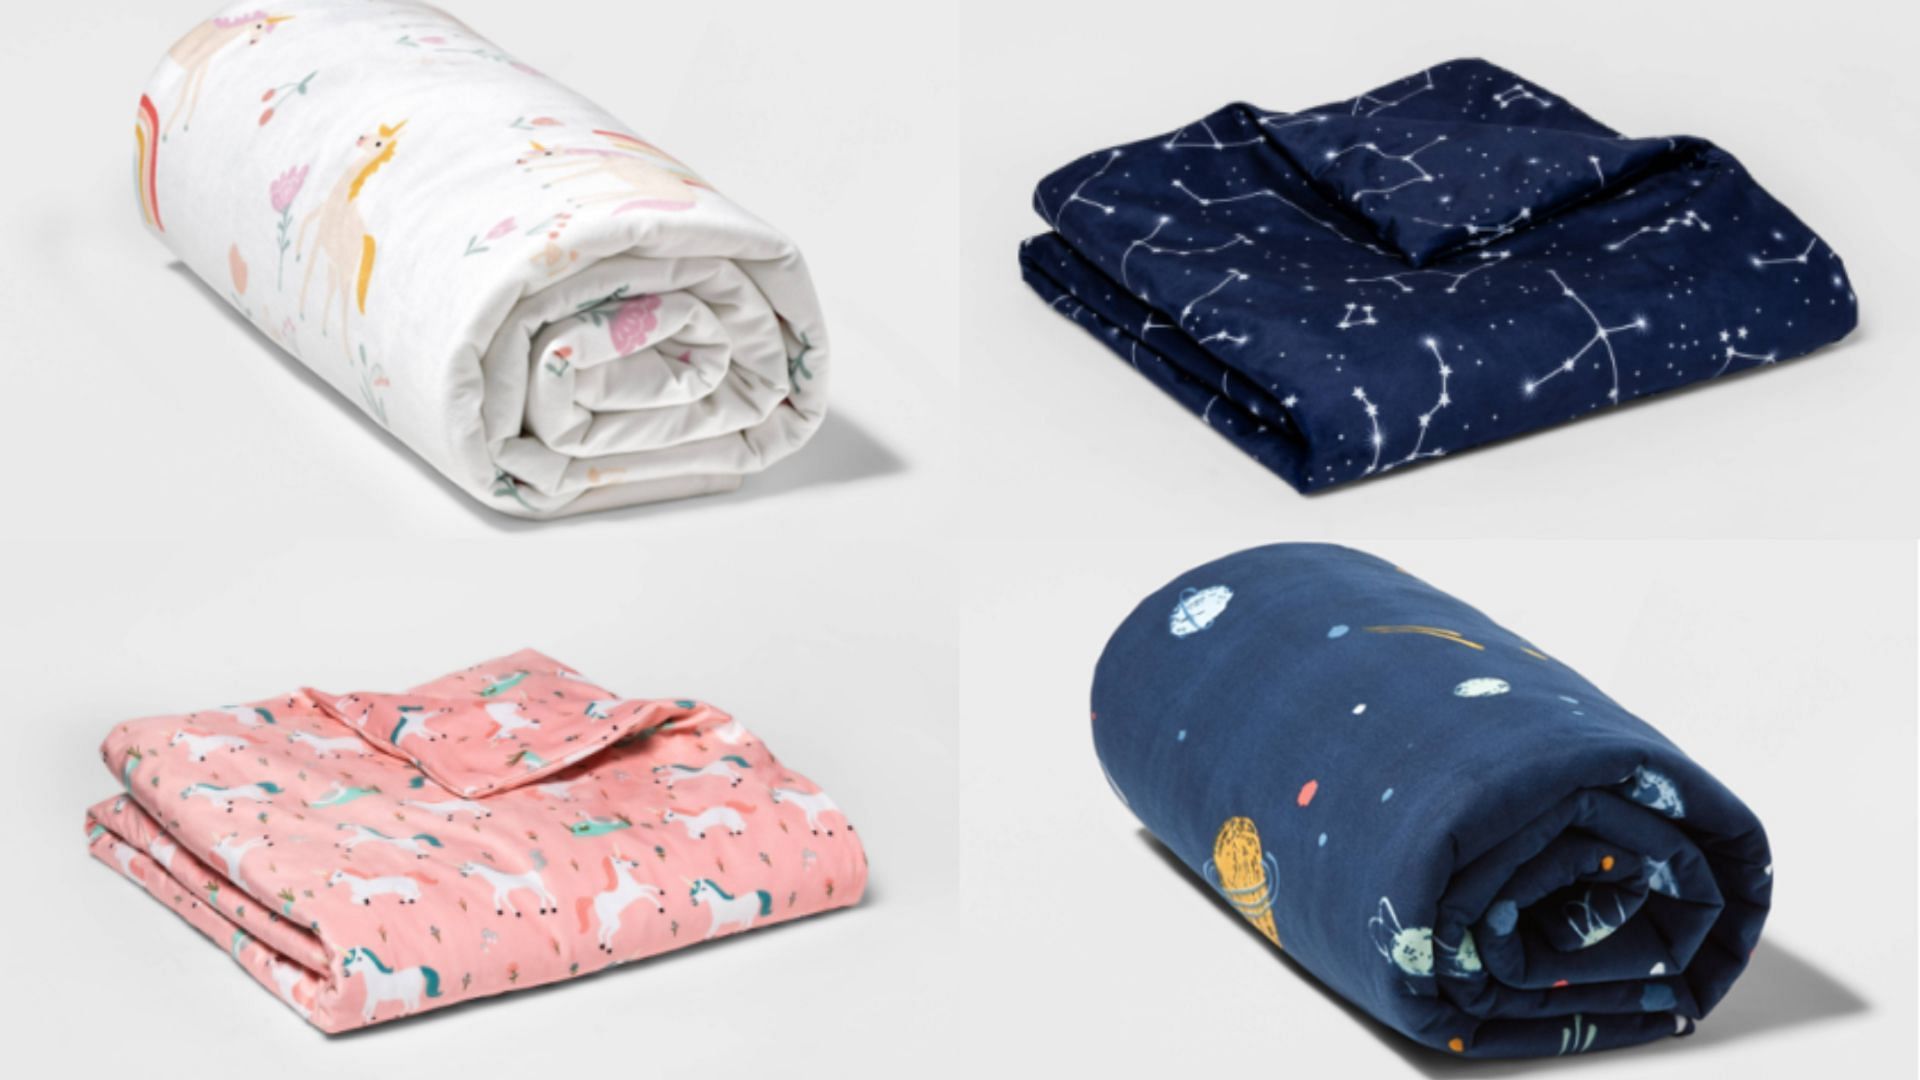 Products from the Target weighted blanket recall (Image via CPSC)